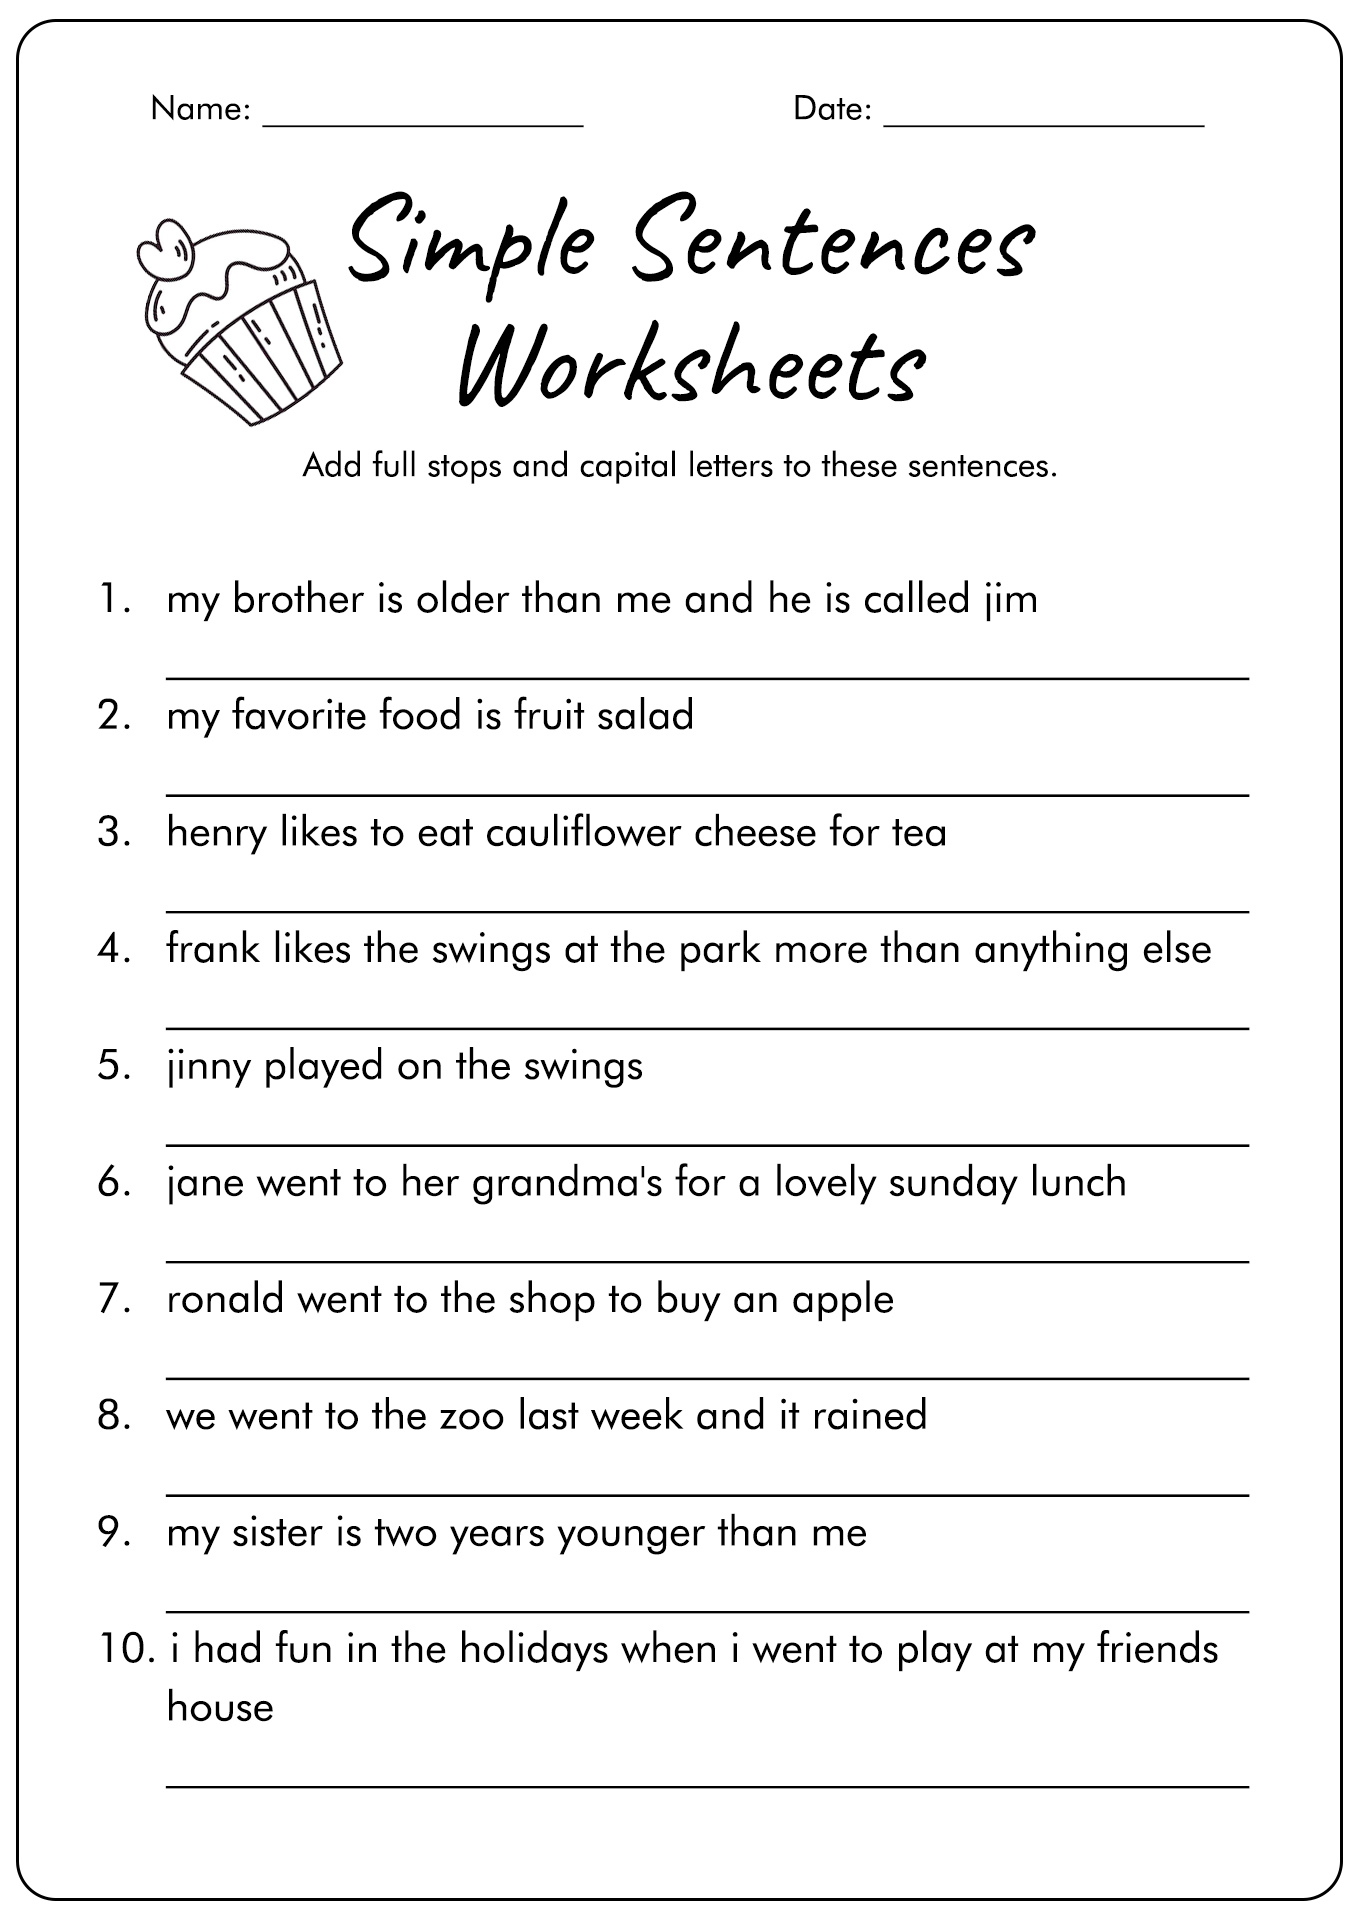 17-best-images-of-nouns-verbs-adjectives-worksheets-1st-grade-haunted-house-adjectives-first